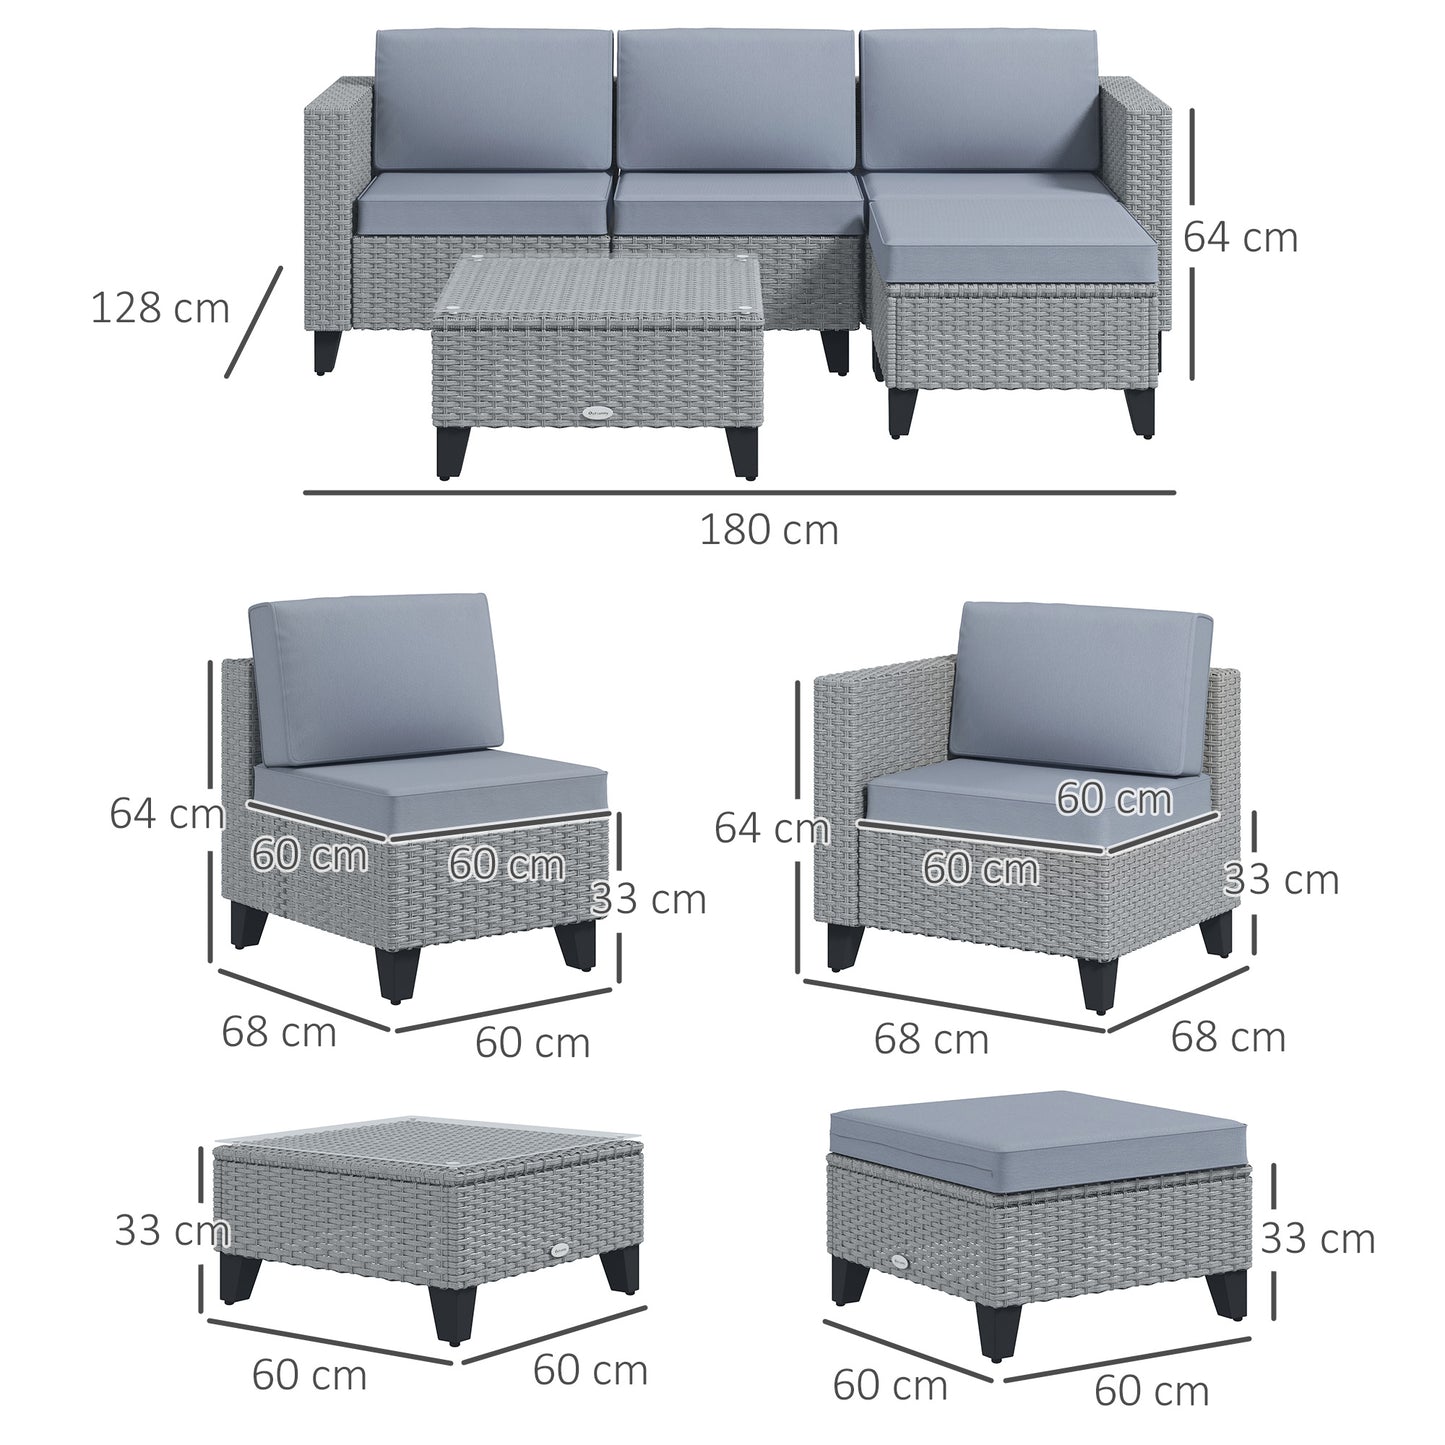 Outsunny 5-Piece Rattan Patio Furniture Set with Corner Sofa, Footstools, Coffee Table, for Poolside, Grey